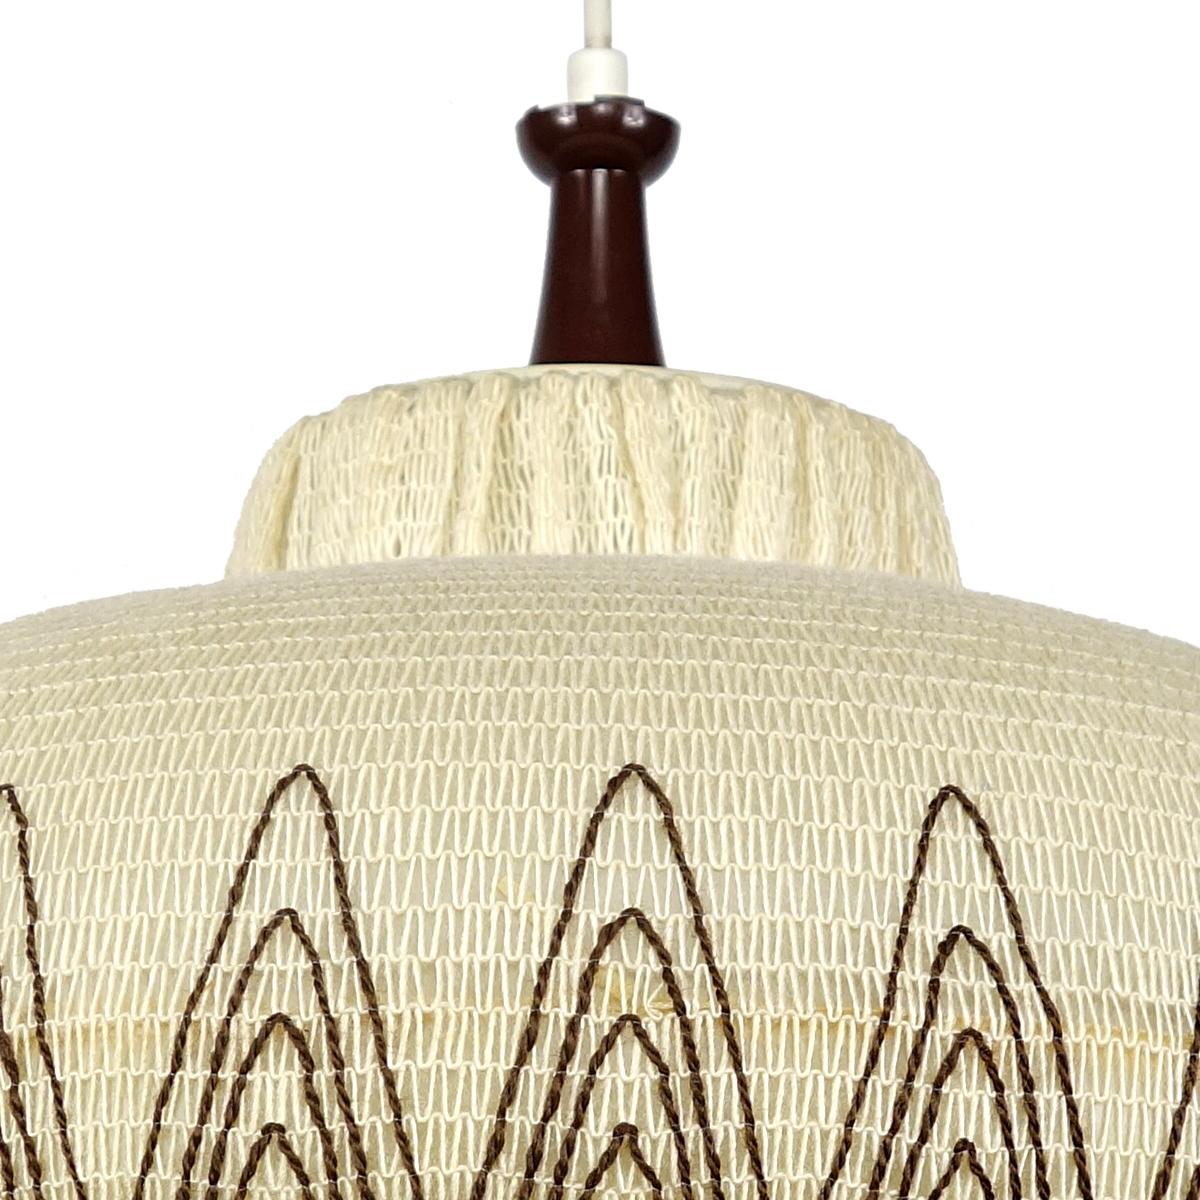 Mid-20th Century Mid-Century Modern Plastic Pendant with Embroidery and Fringes in Chinoiserie